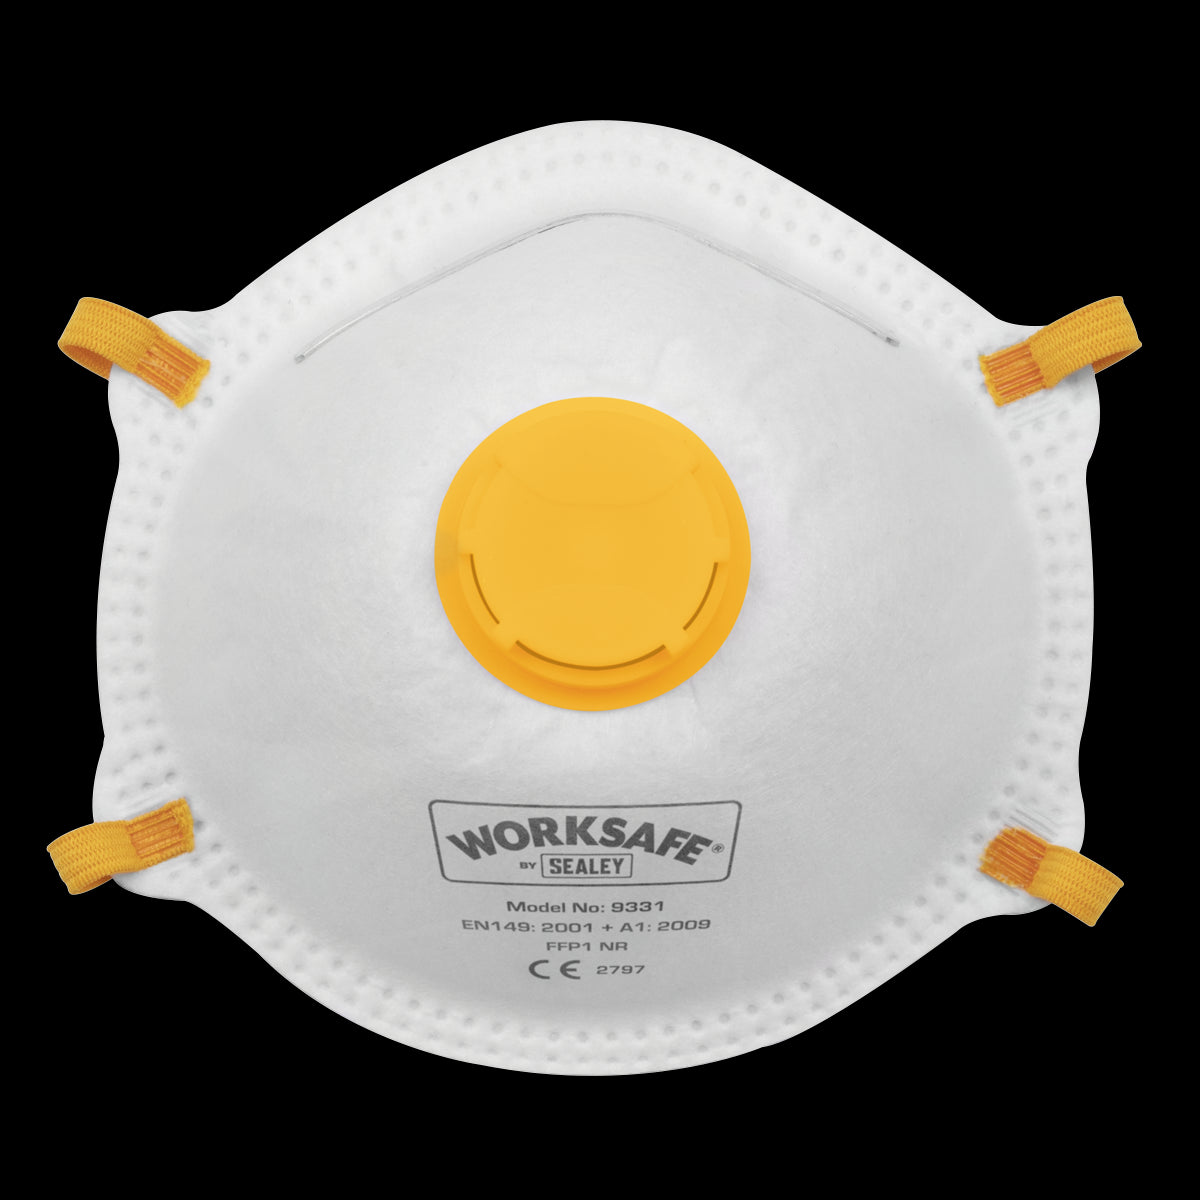 Worksafe by Sealey Cup Mask Valved FFP1 - Pack of 3